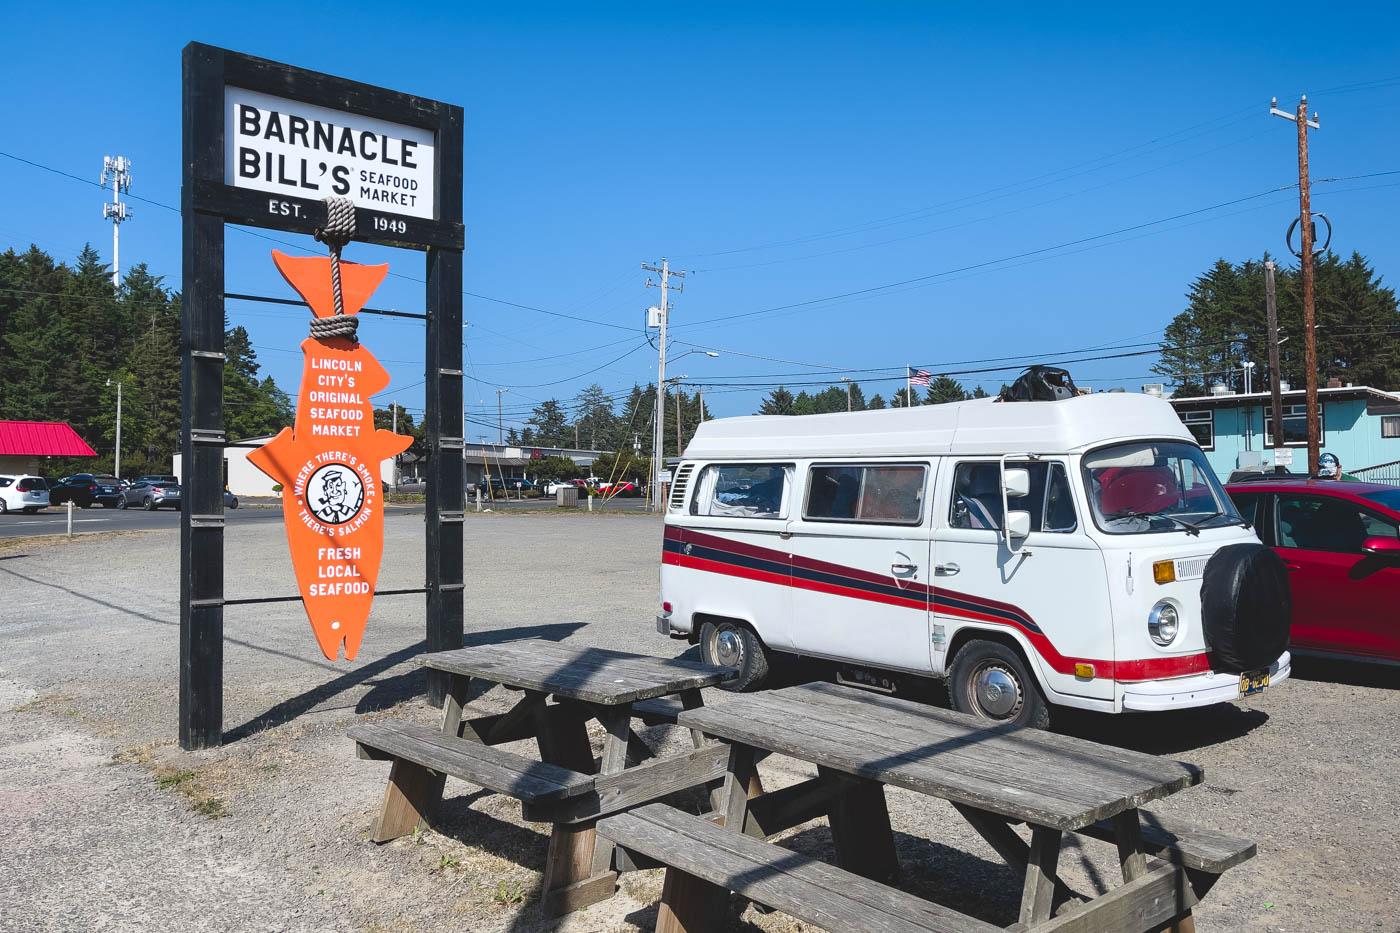 Campervan parked outside of Barnacle Bill's seafood market in Lincoln City.